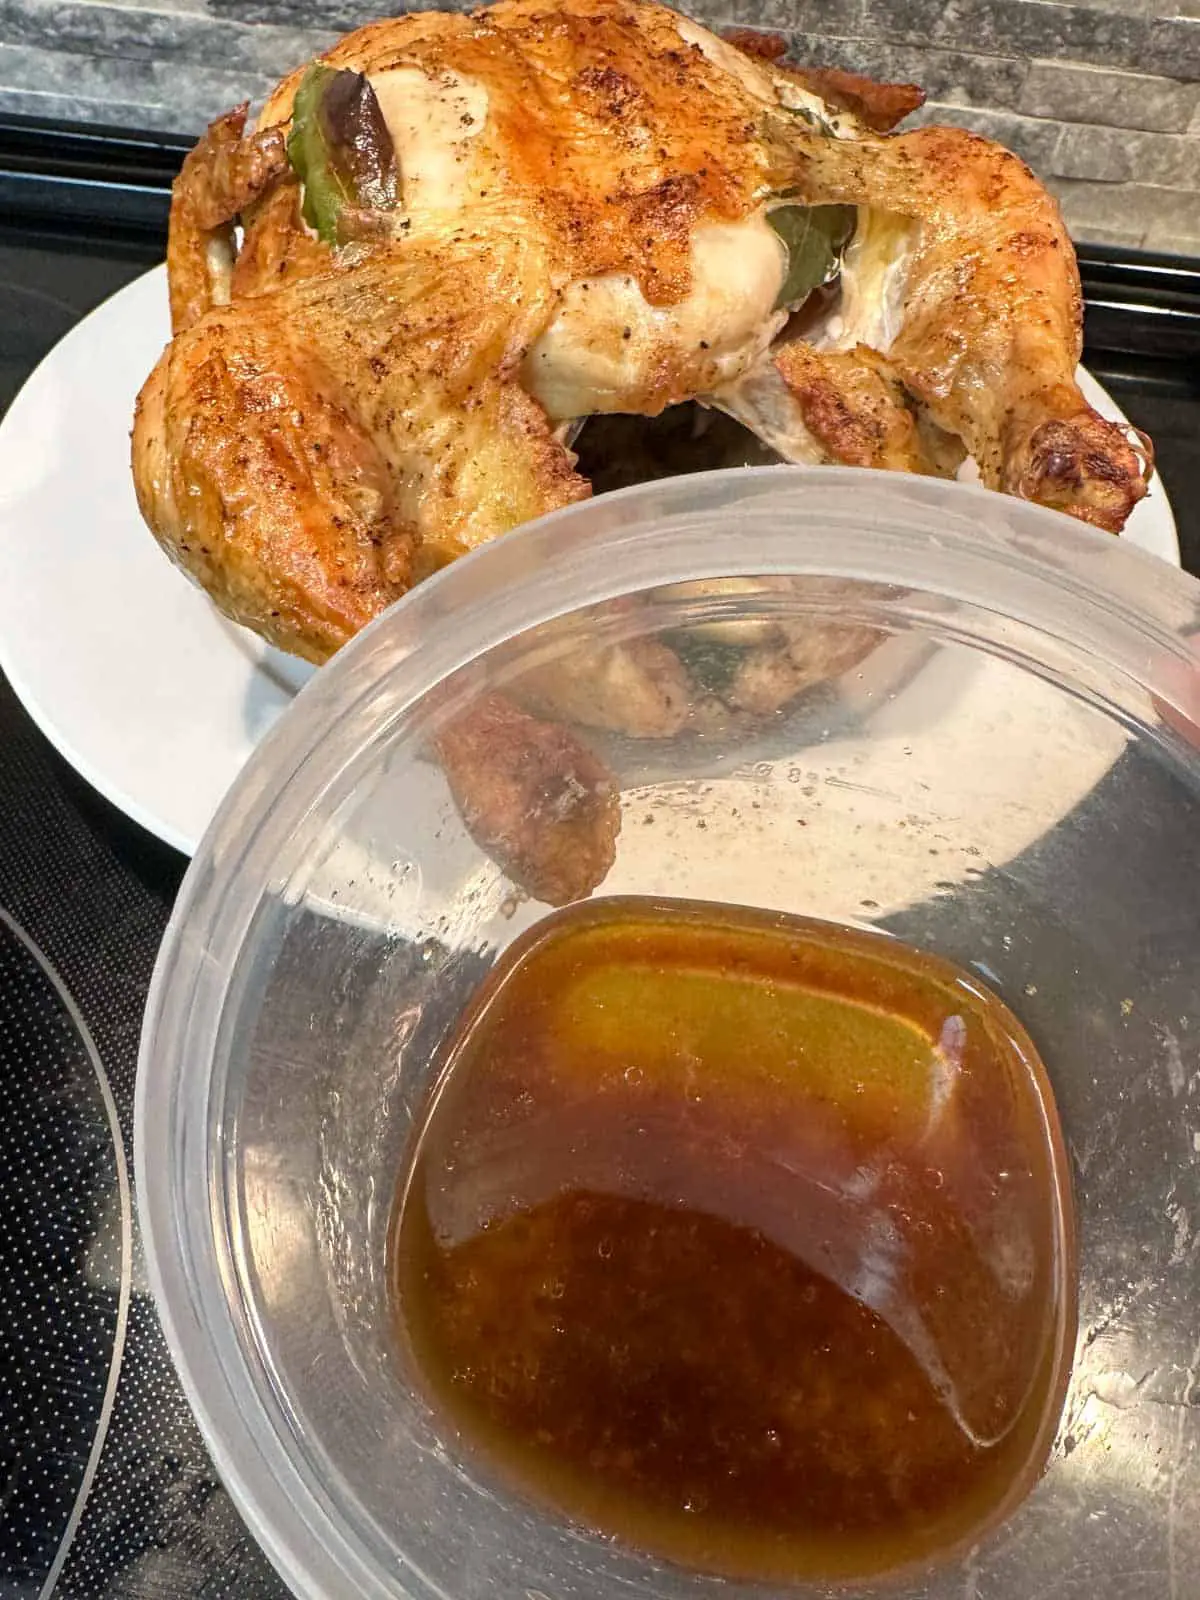 A roast chicken with crispy skin stuffed with garlic and bay leaves on a white plate. There is a plastic container with chicken fat drippings in the foreground.